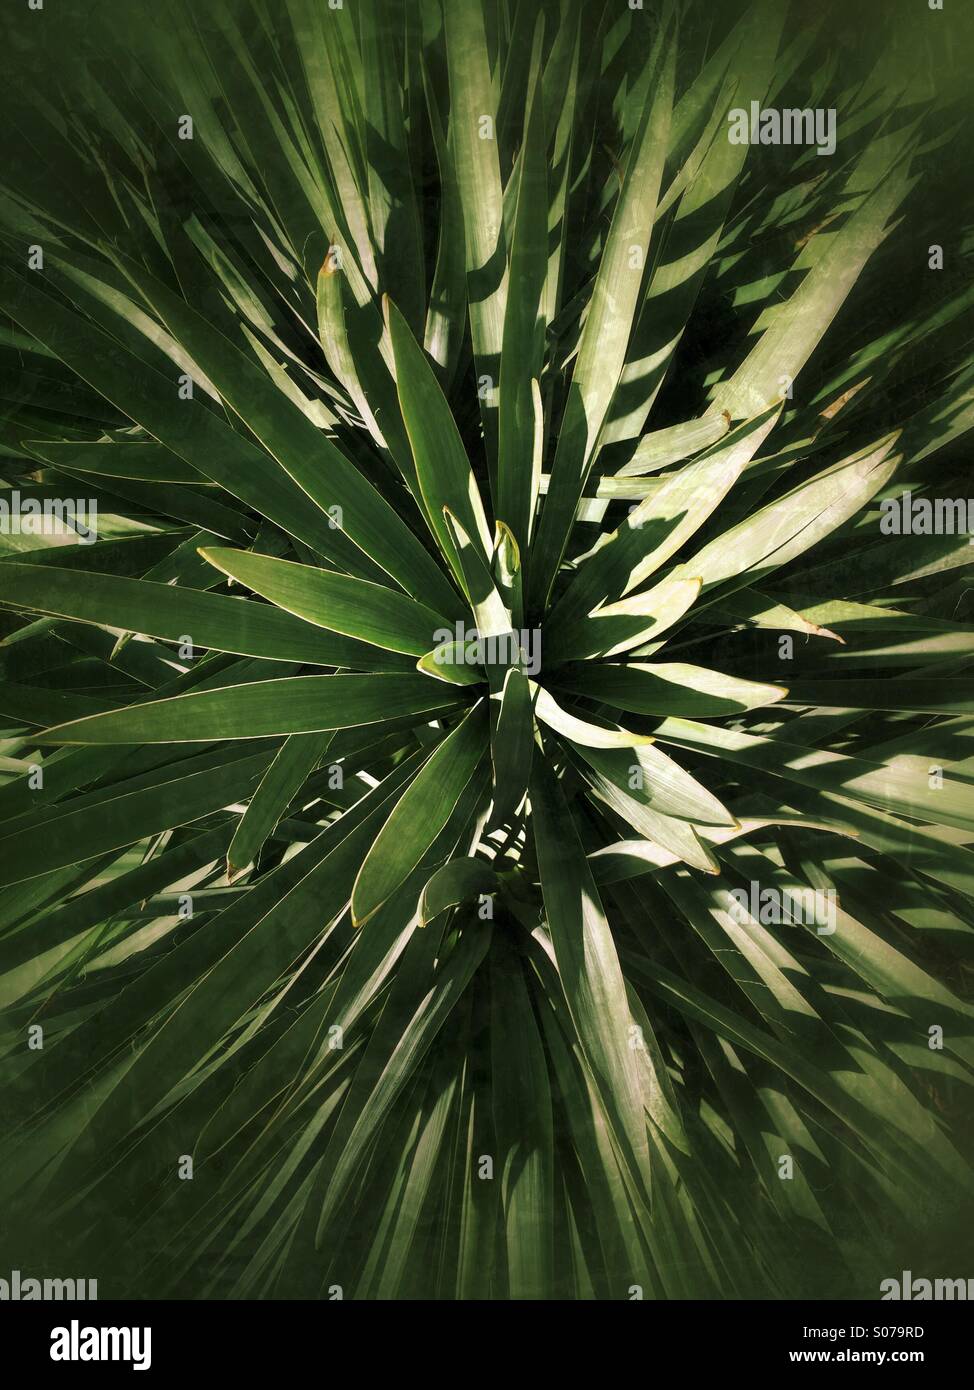 Top view of a yucca plant Stock Photo